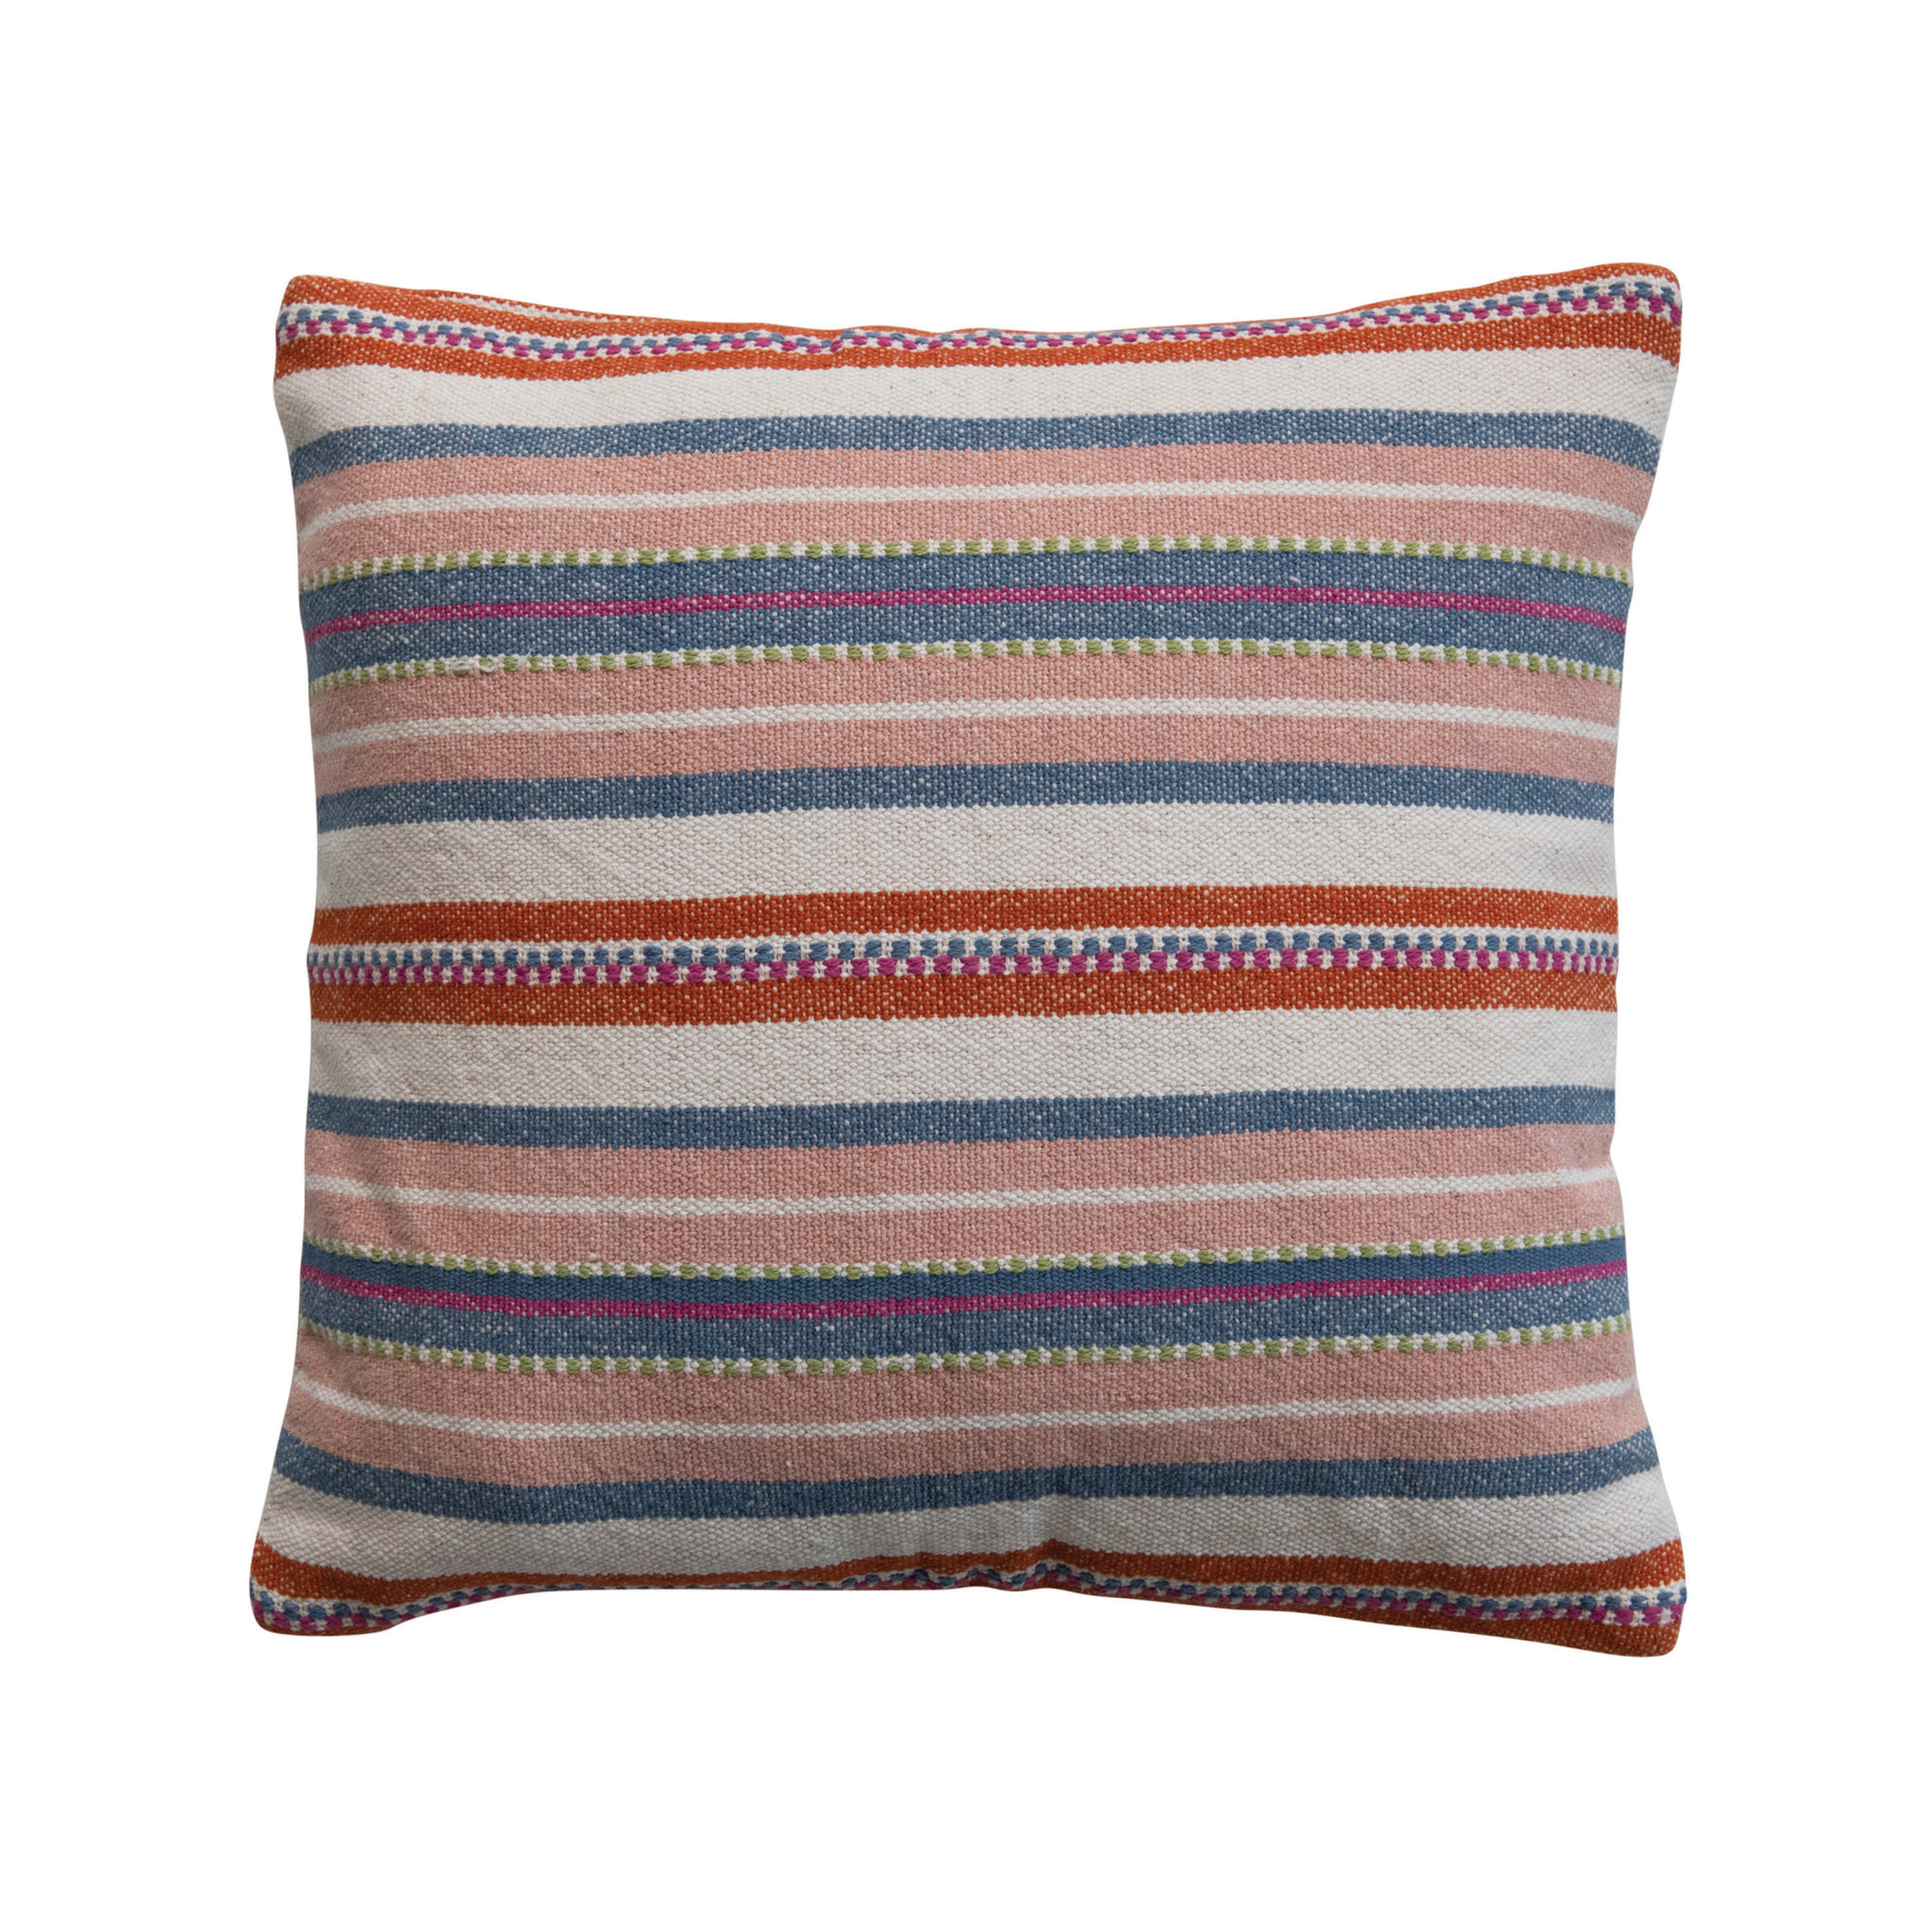 available at m. lynne designs Woven Cotton Pillow with Stripes